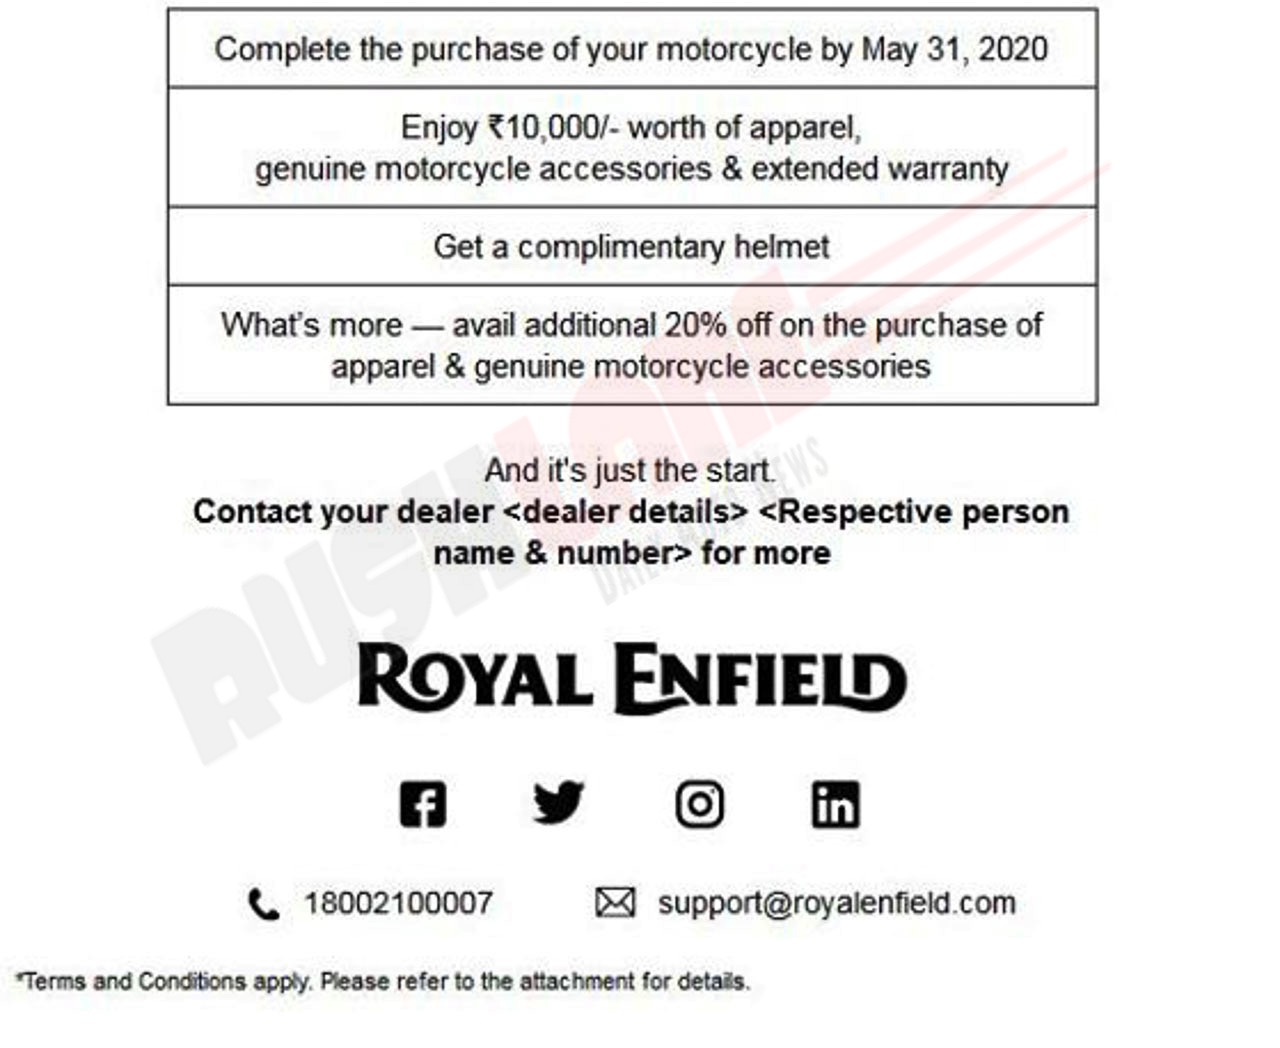 Royal Enfield Free accessories offer